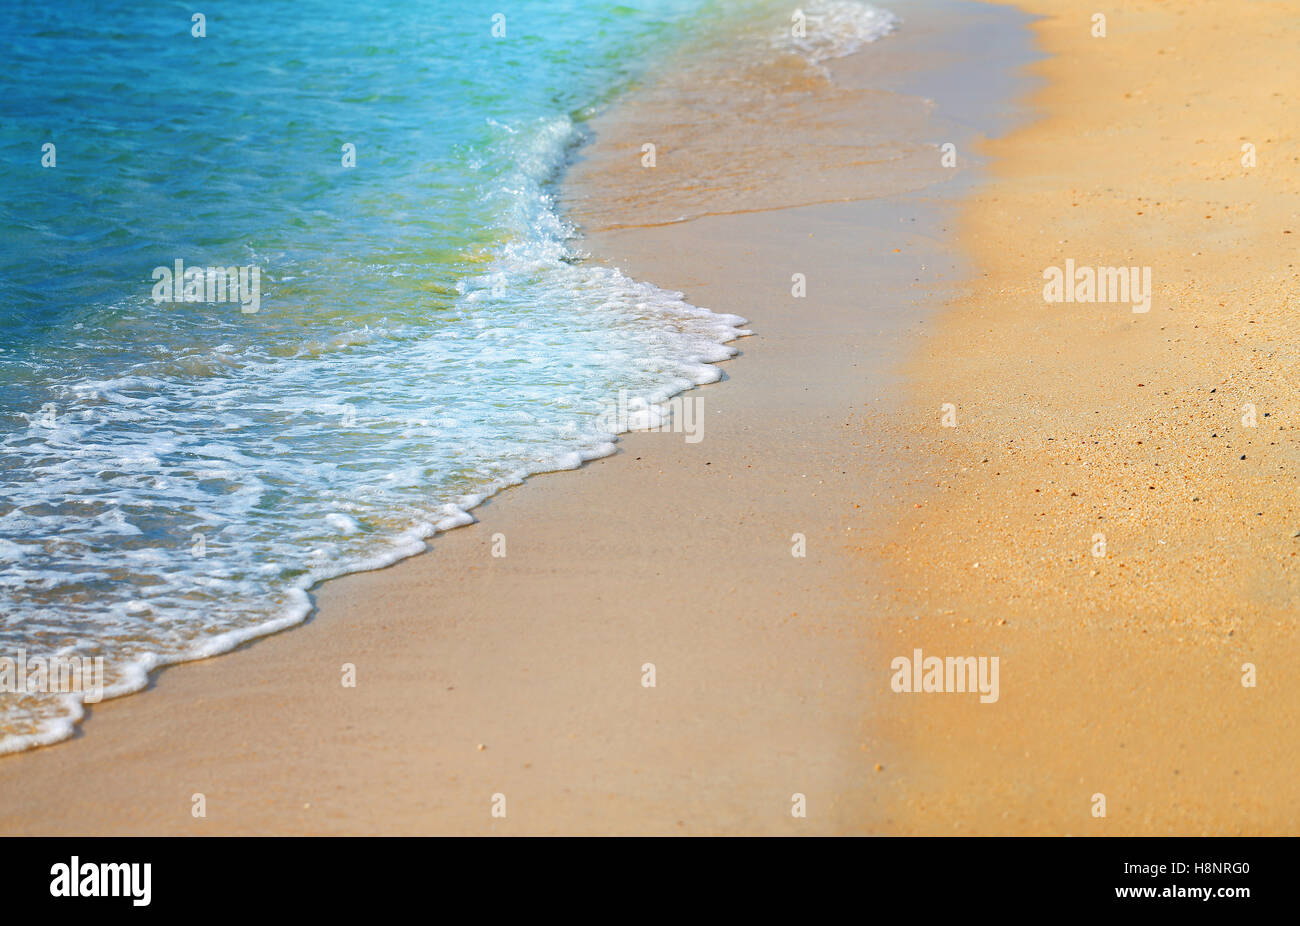 Beautiful waves on the yellow sea sand photographed in close-up Stock Photo